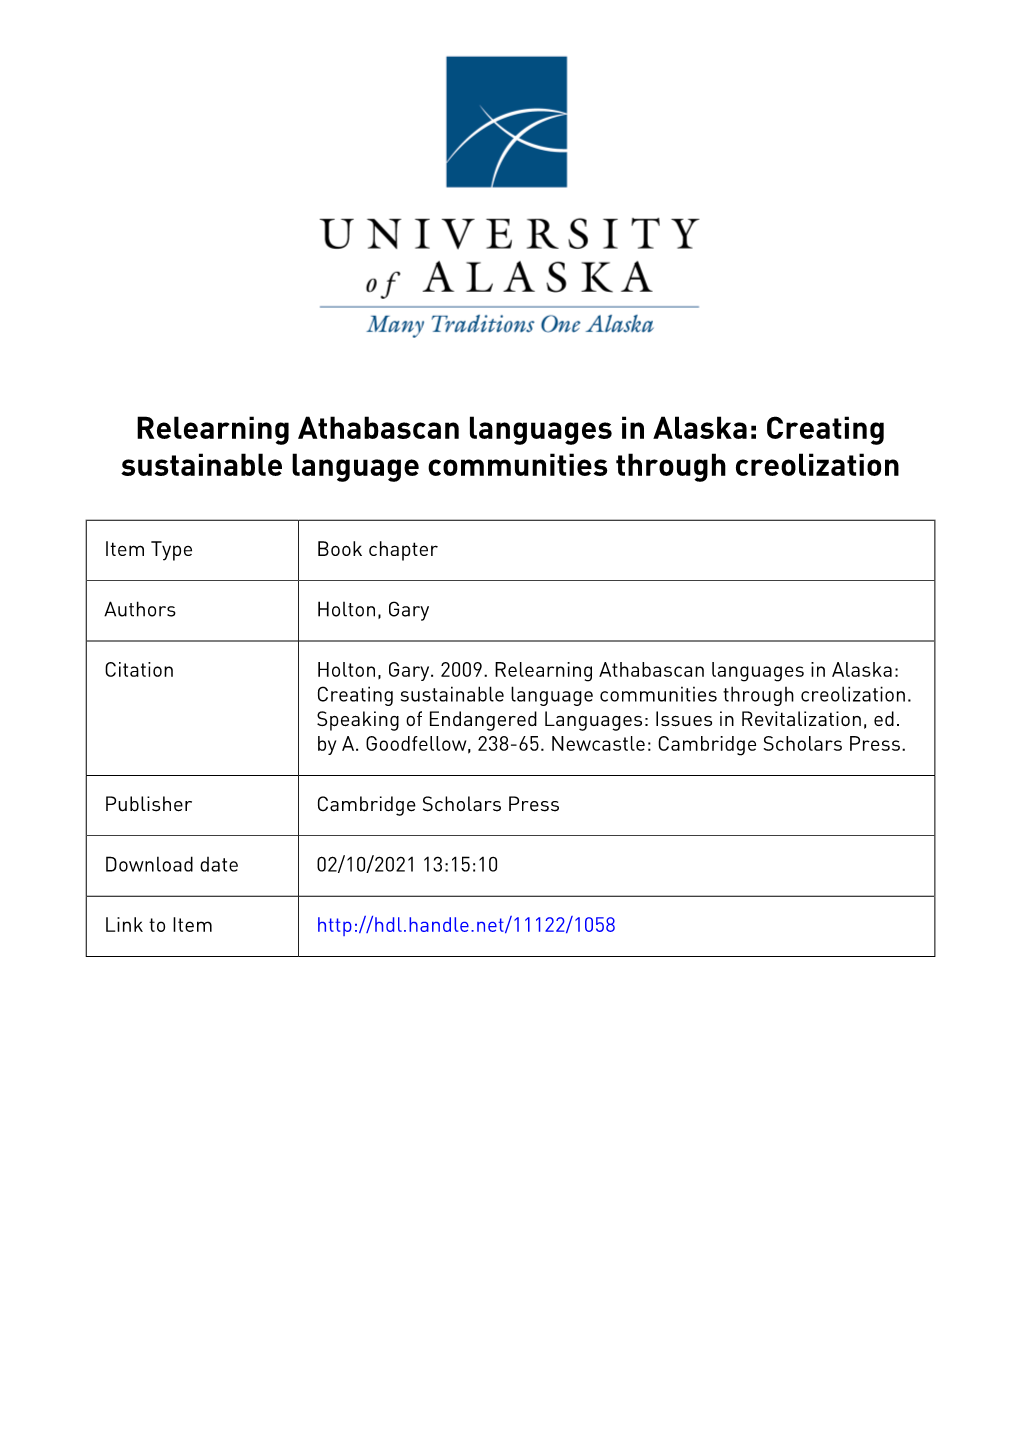 Relearning Athabascan Languages in Alaska: Creating Sustainable Language Communities Through Creolization